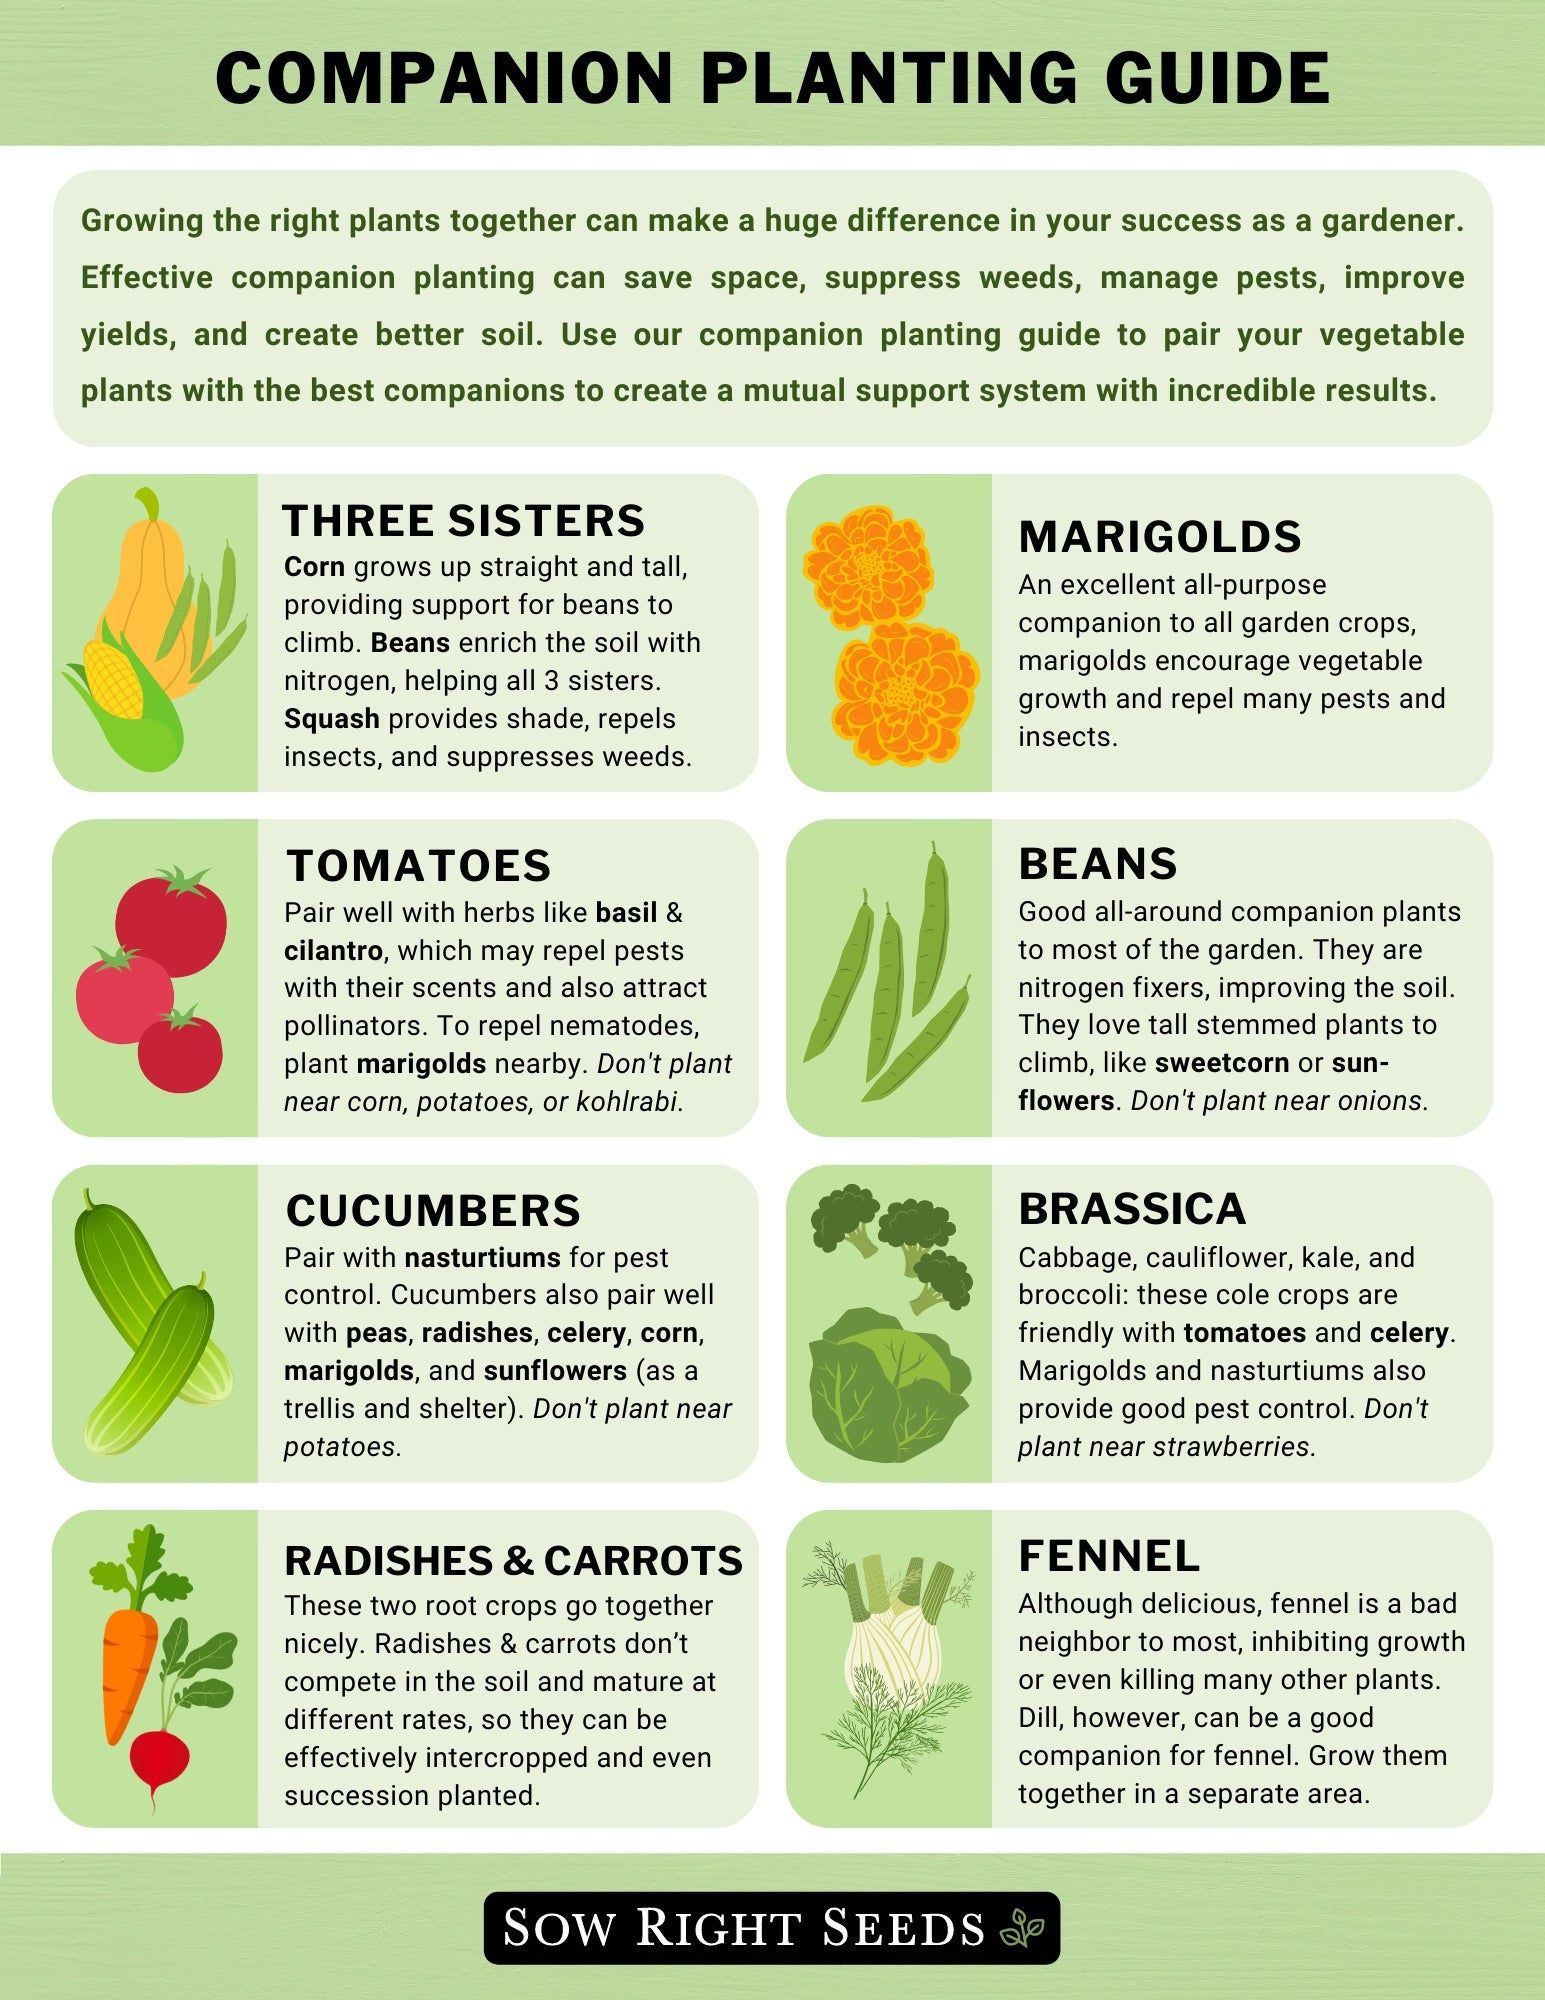 Image of Companion planting chart for flowers - marigolds and beans